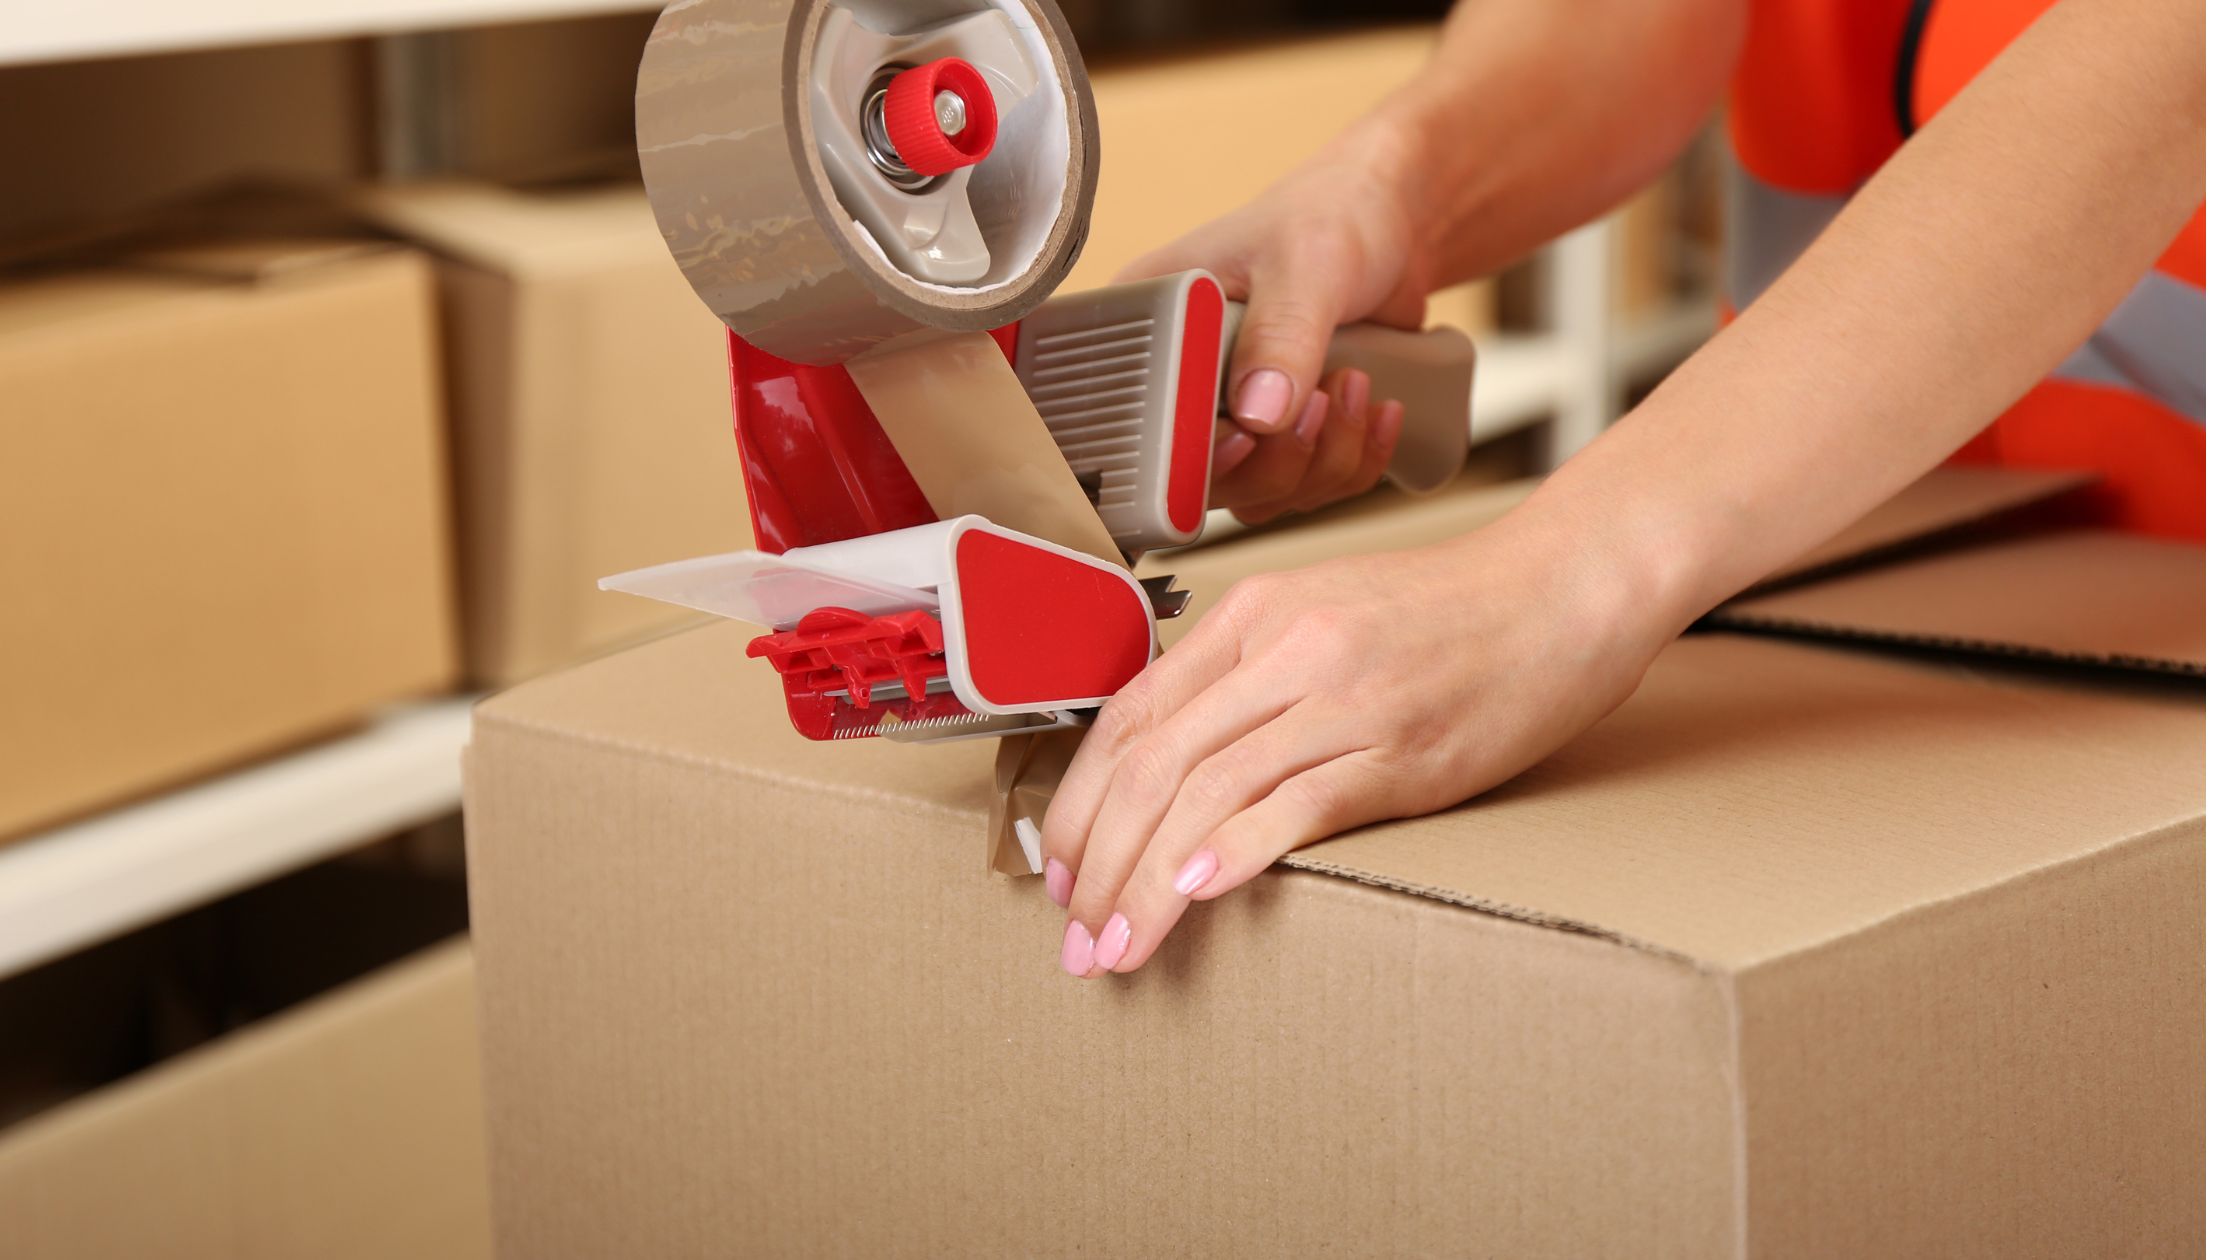 Shipping Made Simple: The Best Corrugated Box for Your Needs